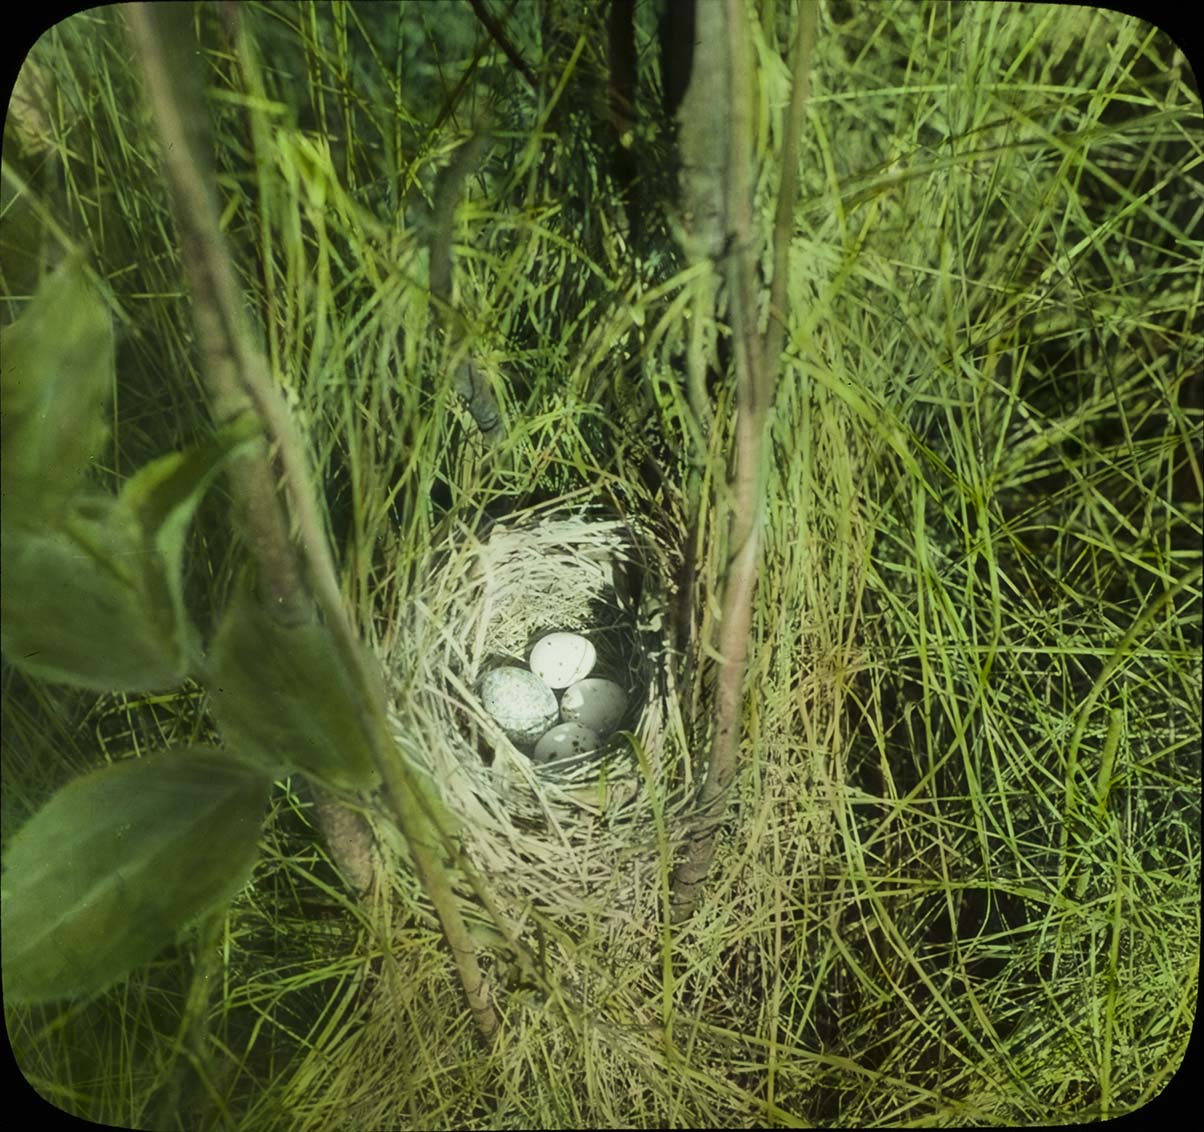 Lantern slide of eggs in a Maryland Yellow Throat nest